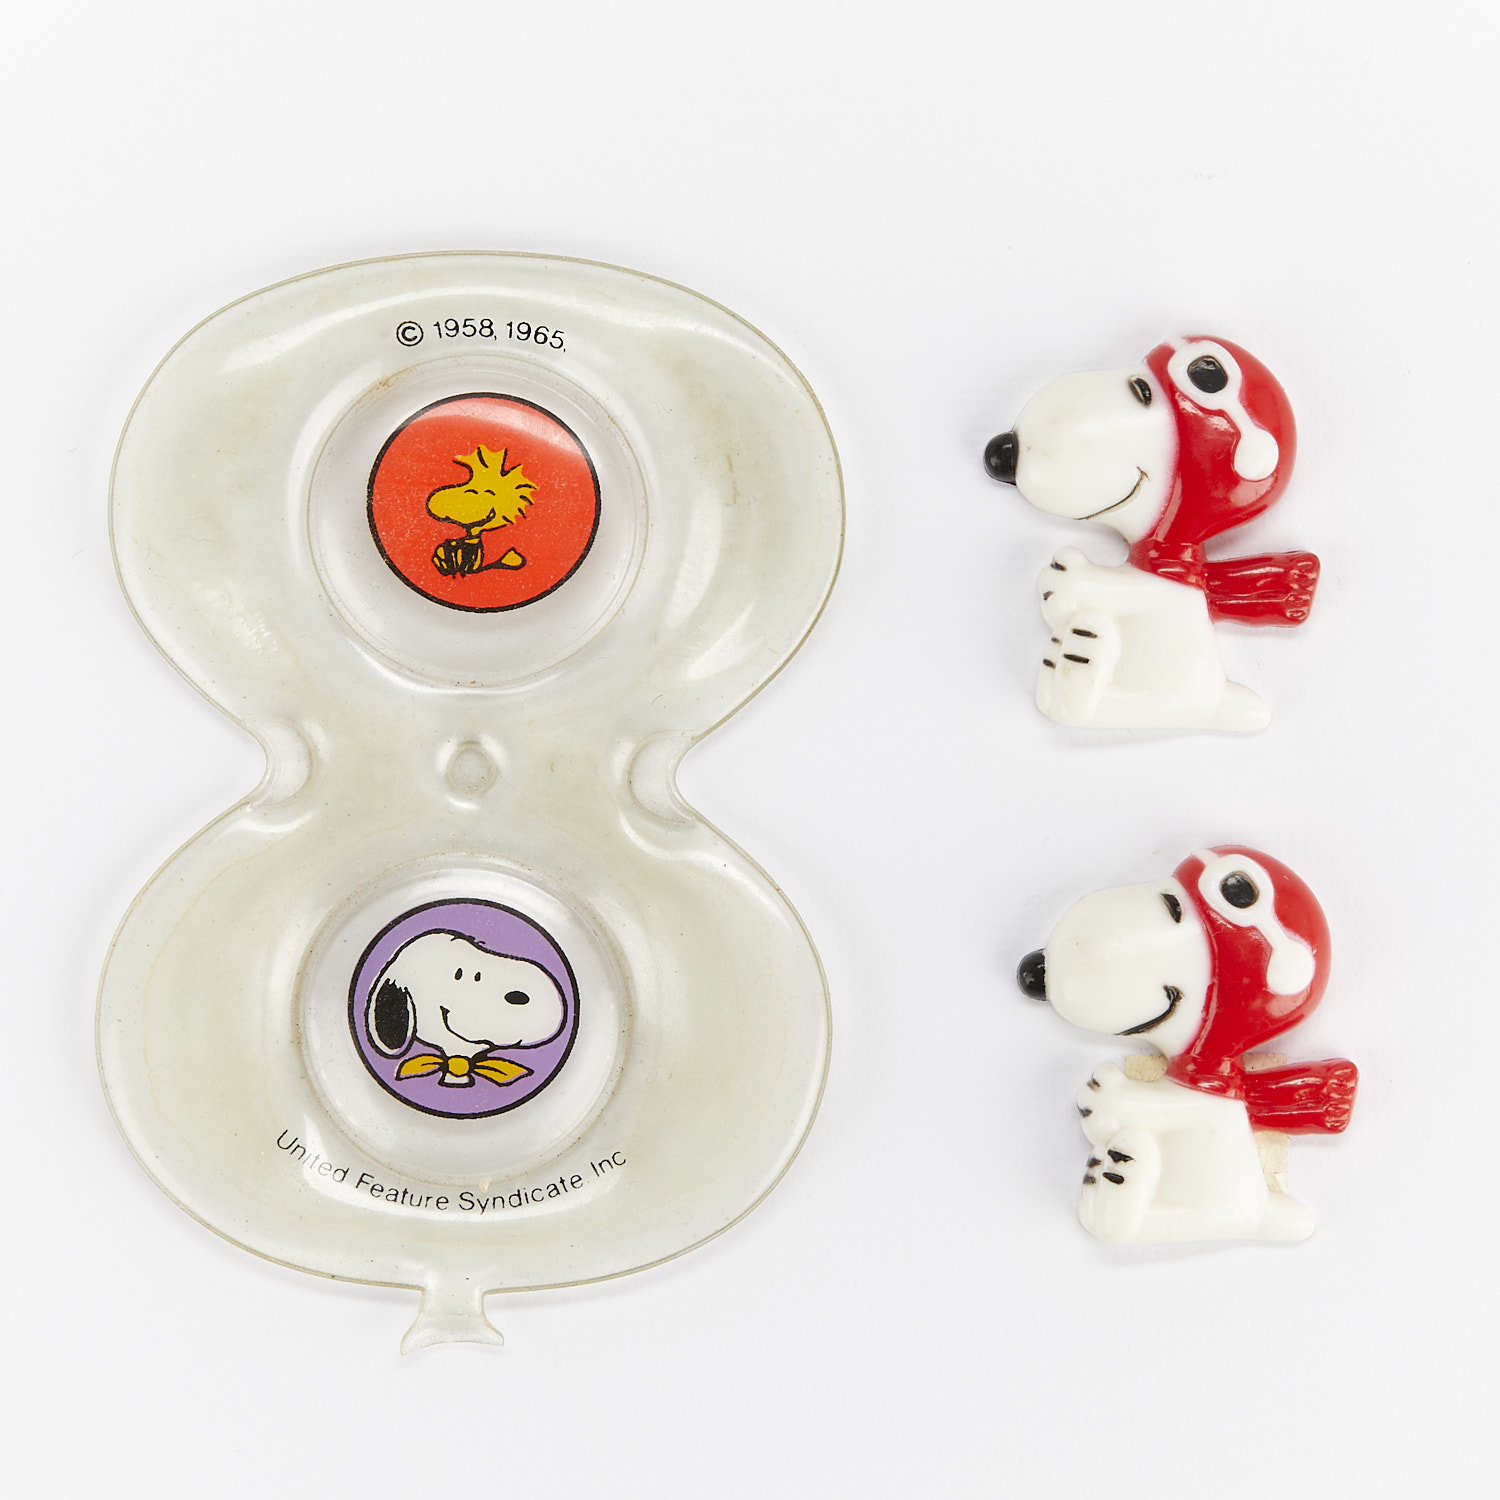 Group of 16 Snoopy Figurines and Bandages - Image 2 of 12